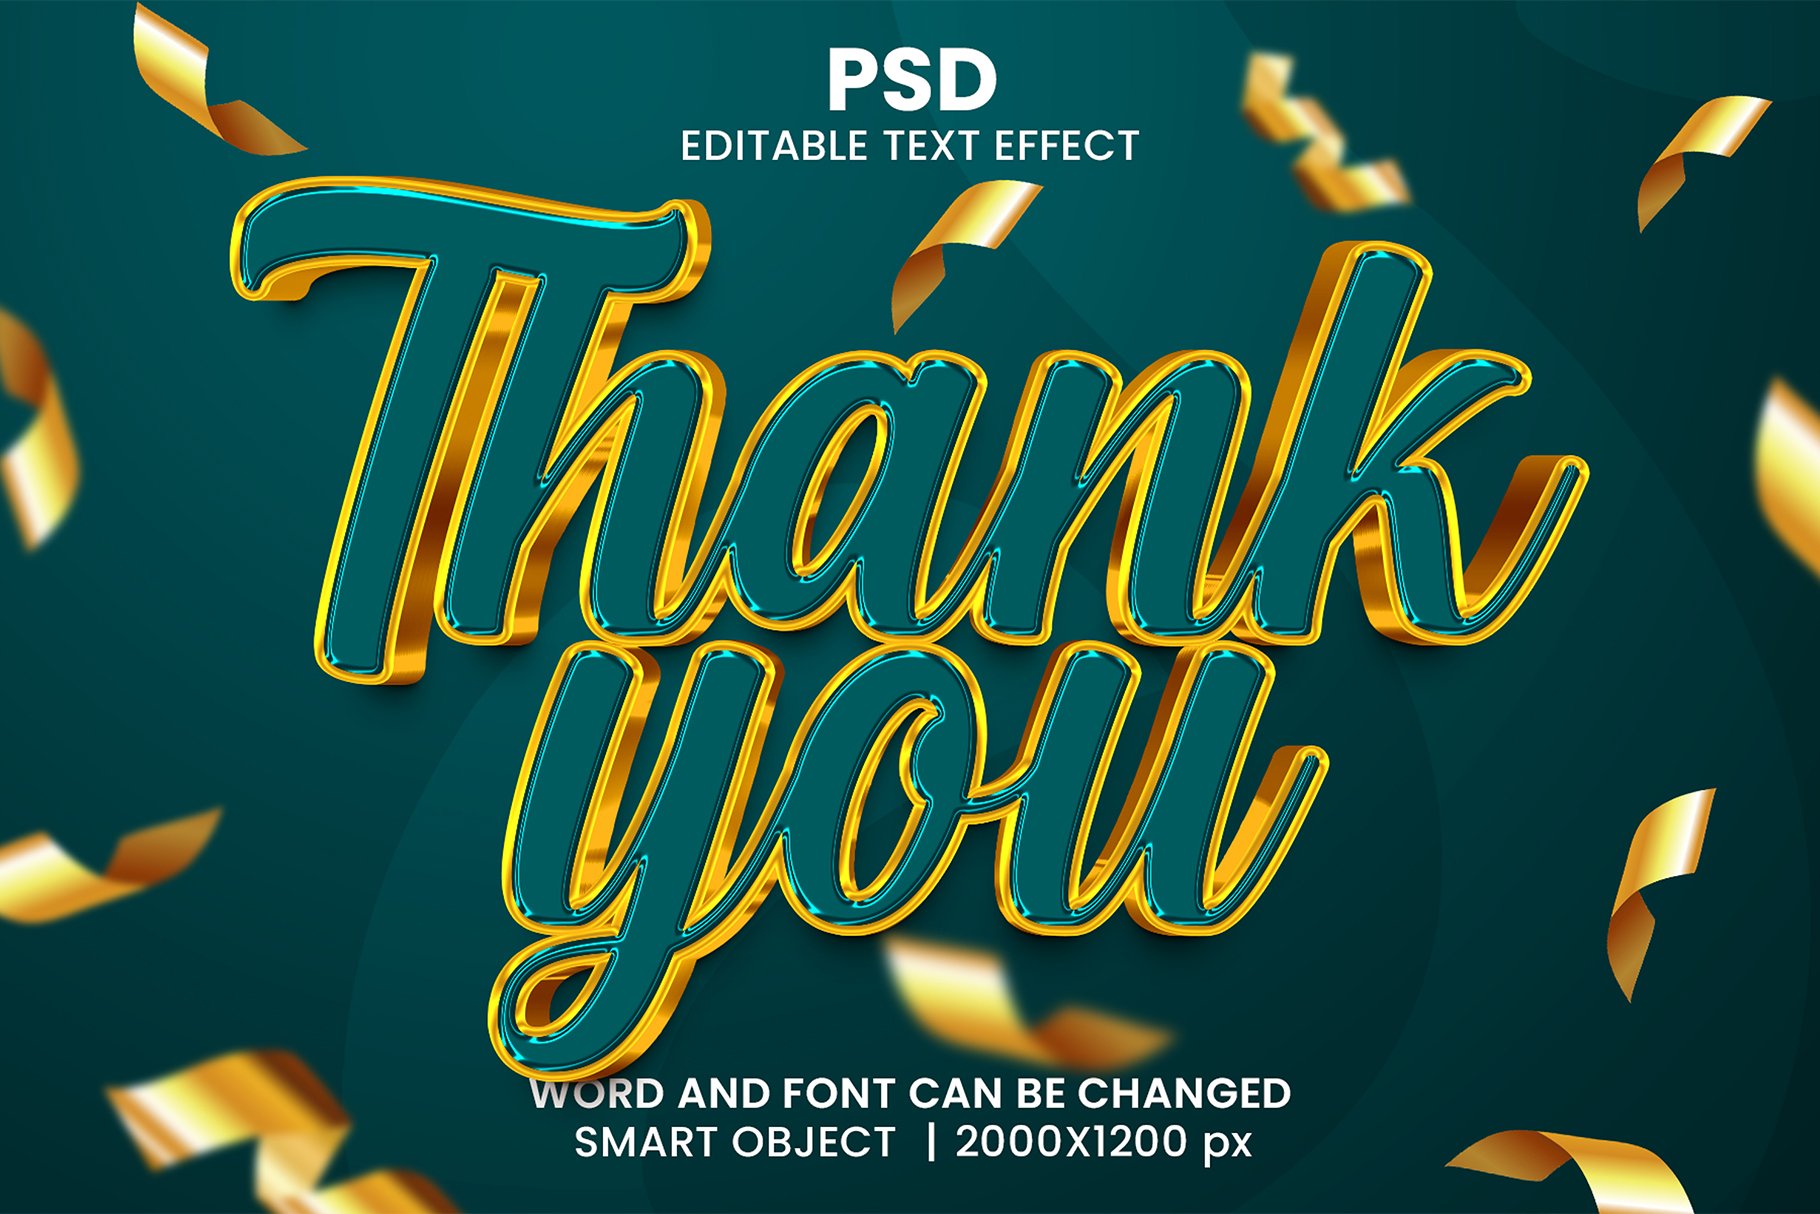 Thank you 3d Editable Text Effectcover image.